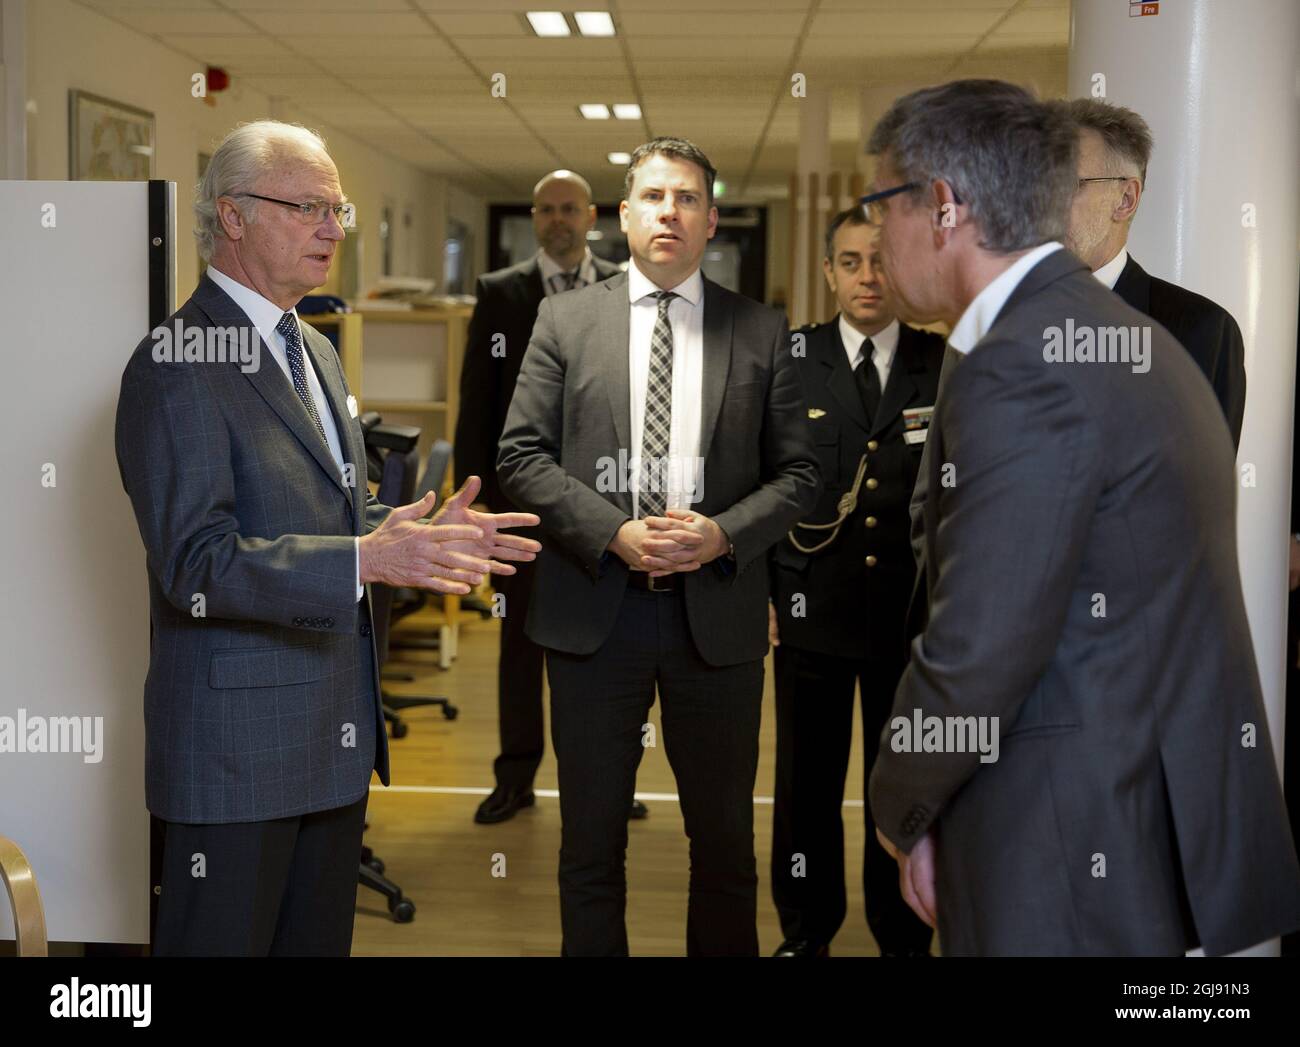 NORRKOPING 2015-02-20 King Carl Gustaf talks to officials during his visit to Â“The Migration BoardÂ” of Sweden in Norrkoping, Sweden, February 20, 2015. The Migration Board handles application for immigration to Sweden. Foto: Stefan Jerrevang / TT / Kod 60160  Stock Photo